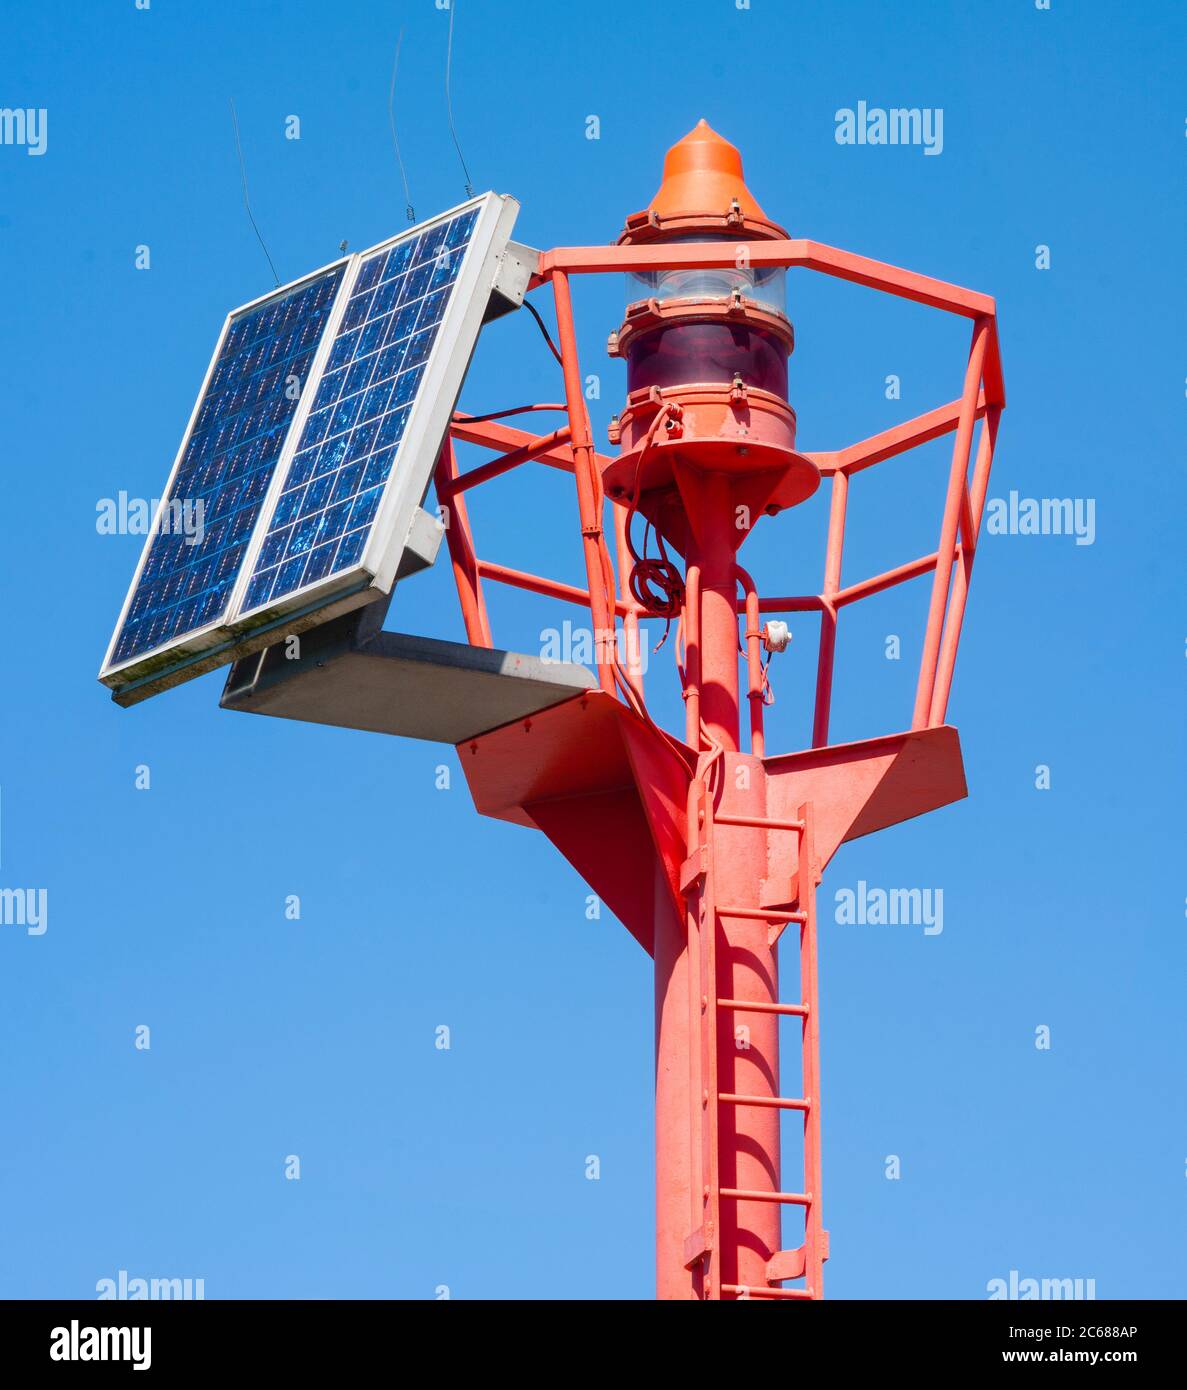 Solar powered port signal, Port, Dieppe, Normandy, France Stock Photo